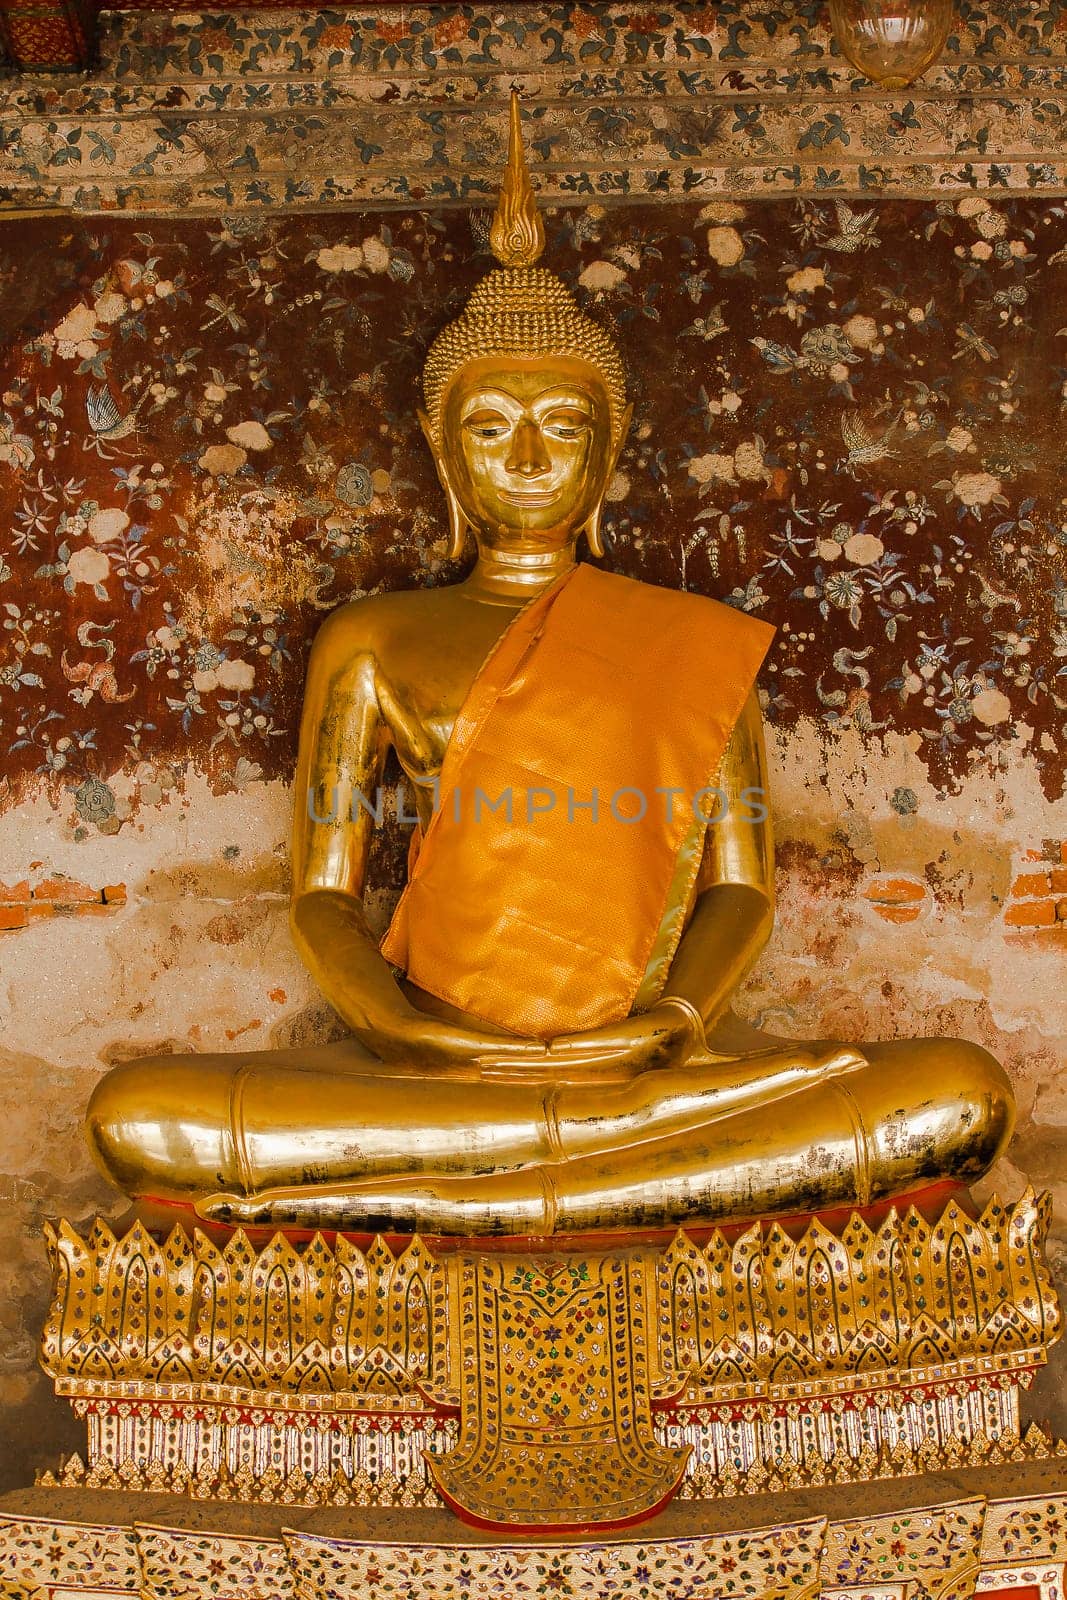 Golden Buddha beside old walls in Thai temples